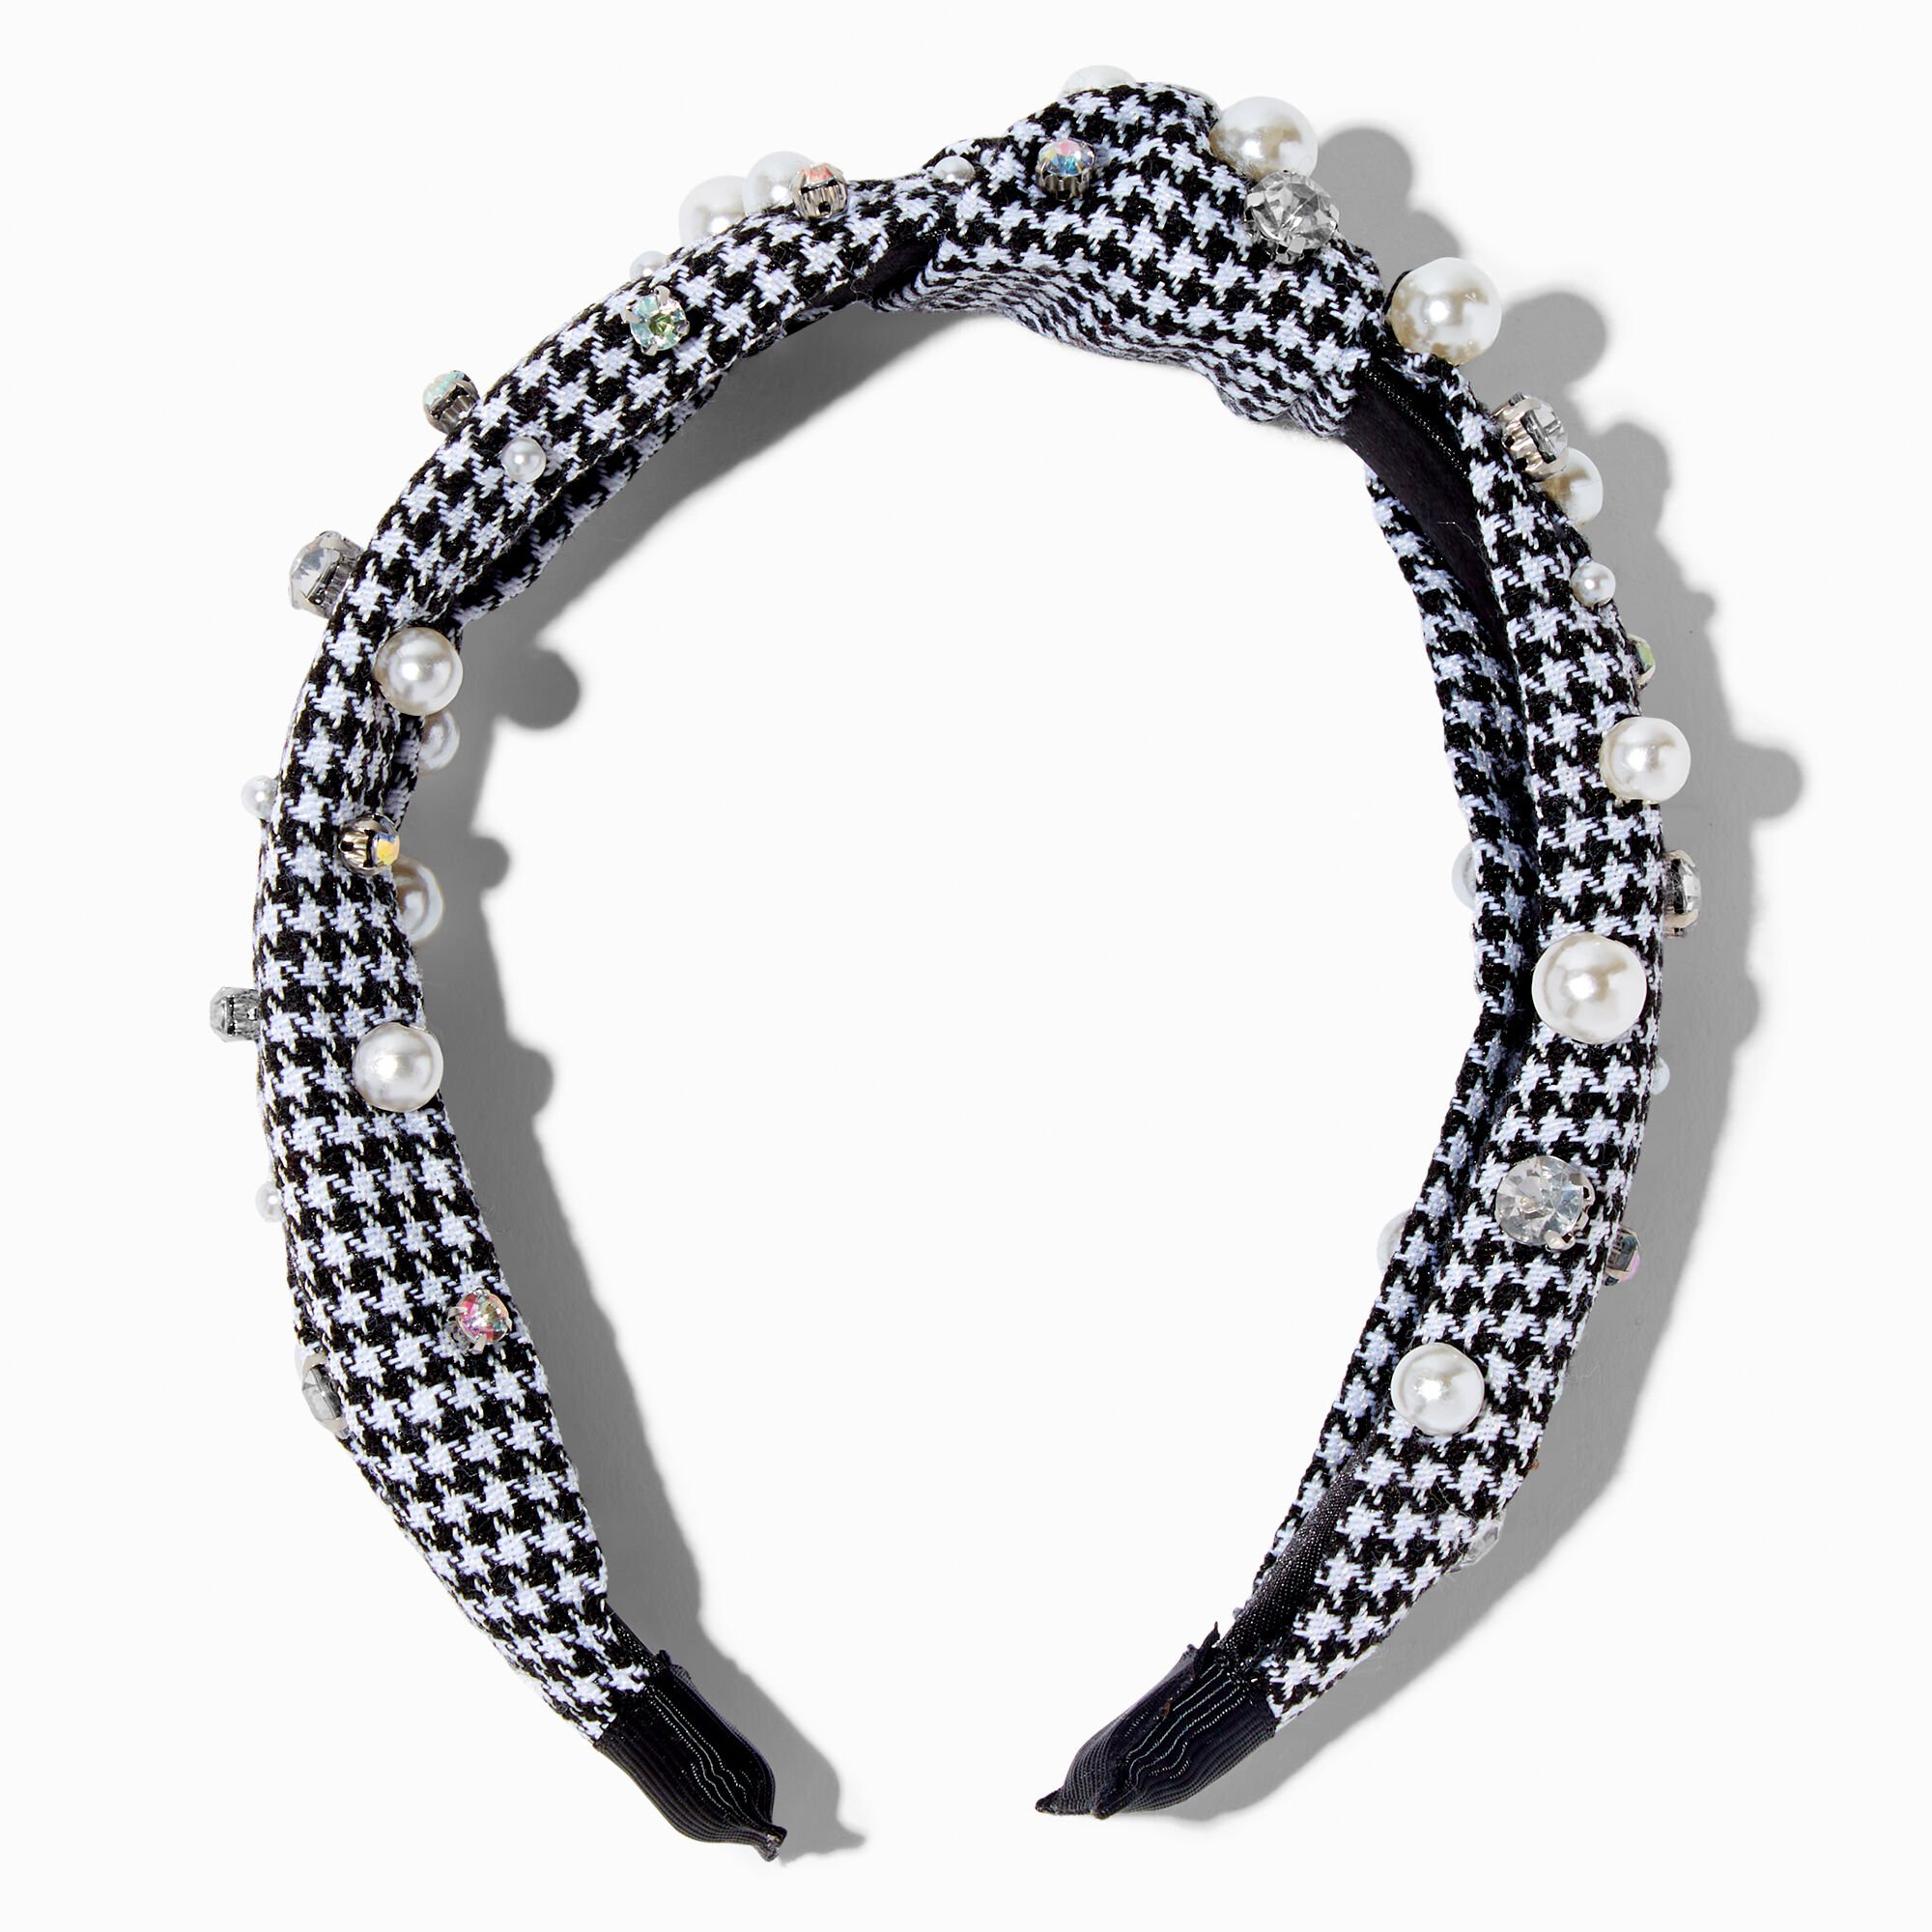 View Claires Houndstooth Embellished Knotted Headband information